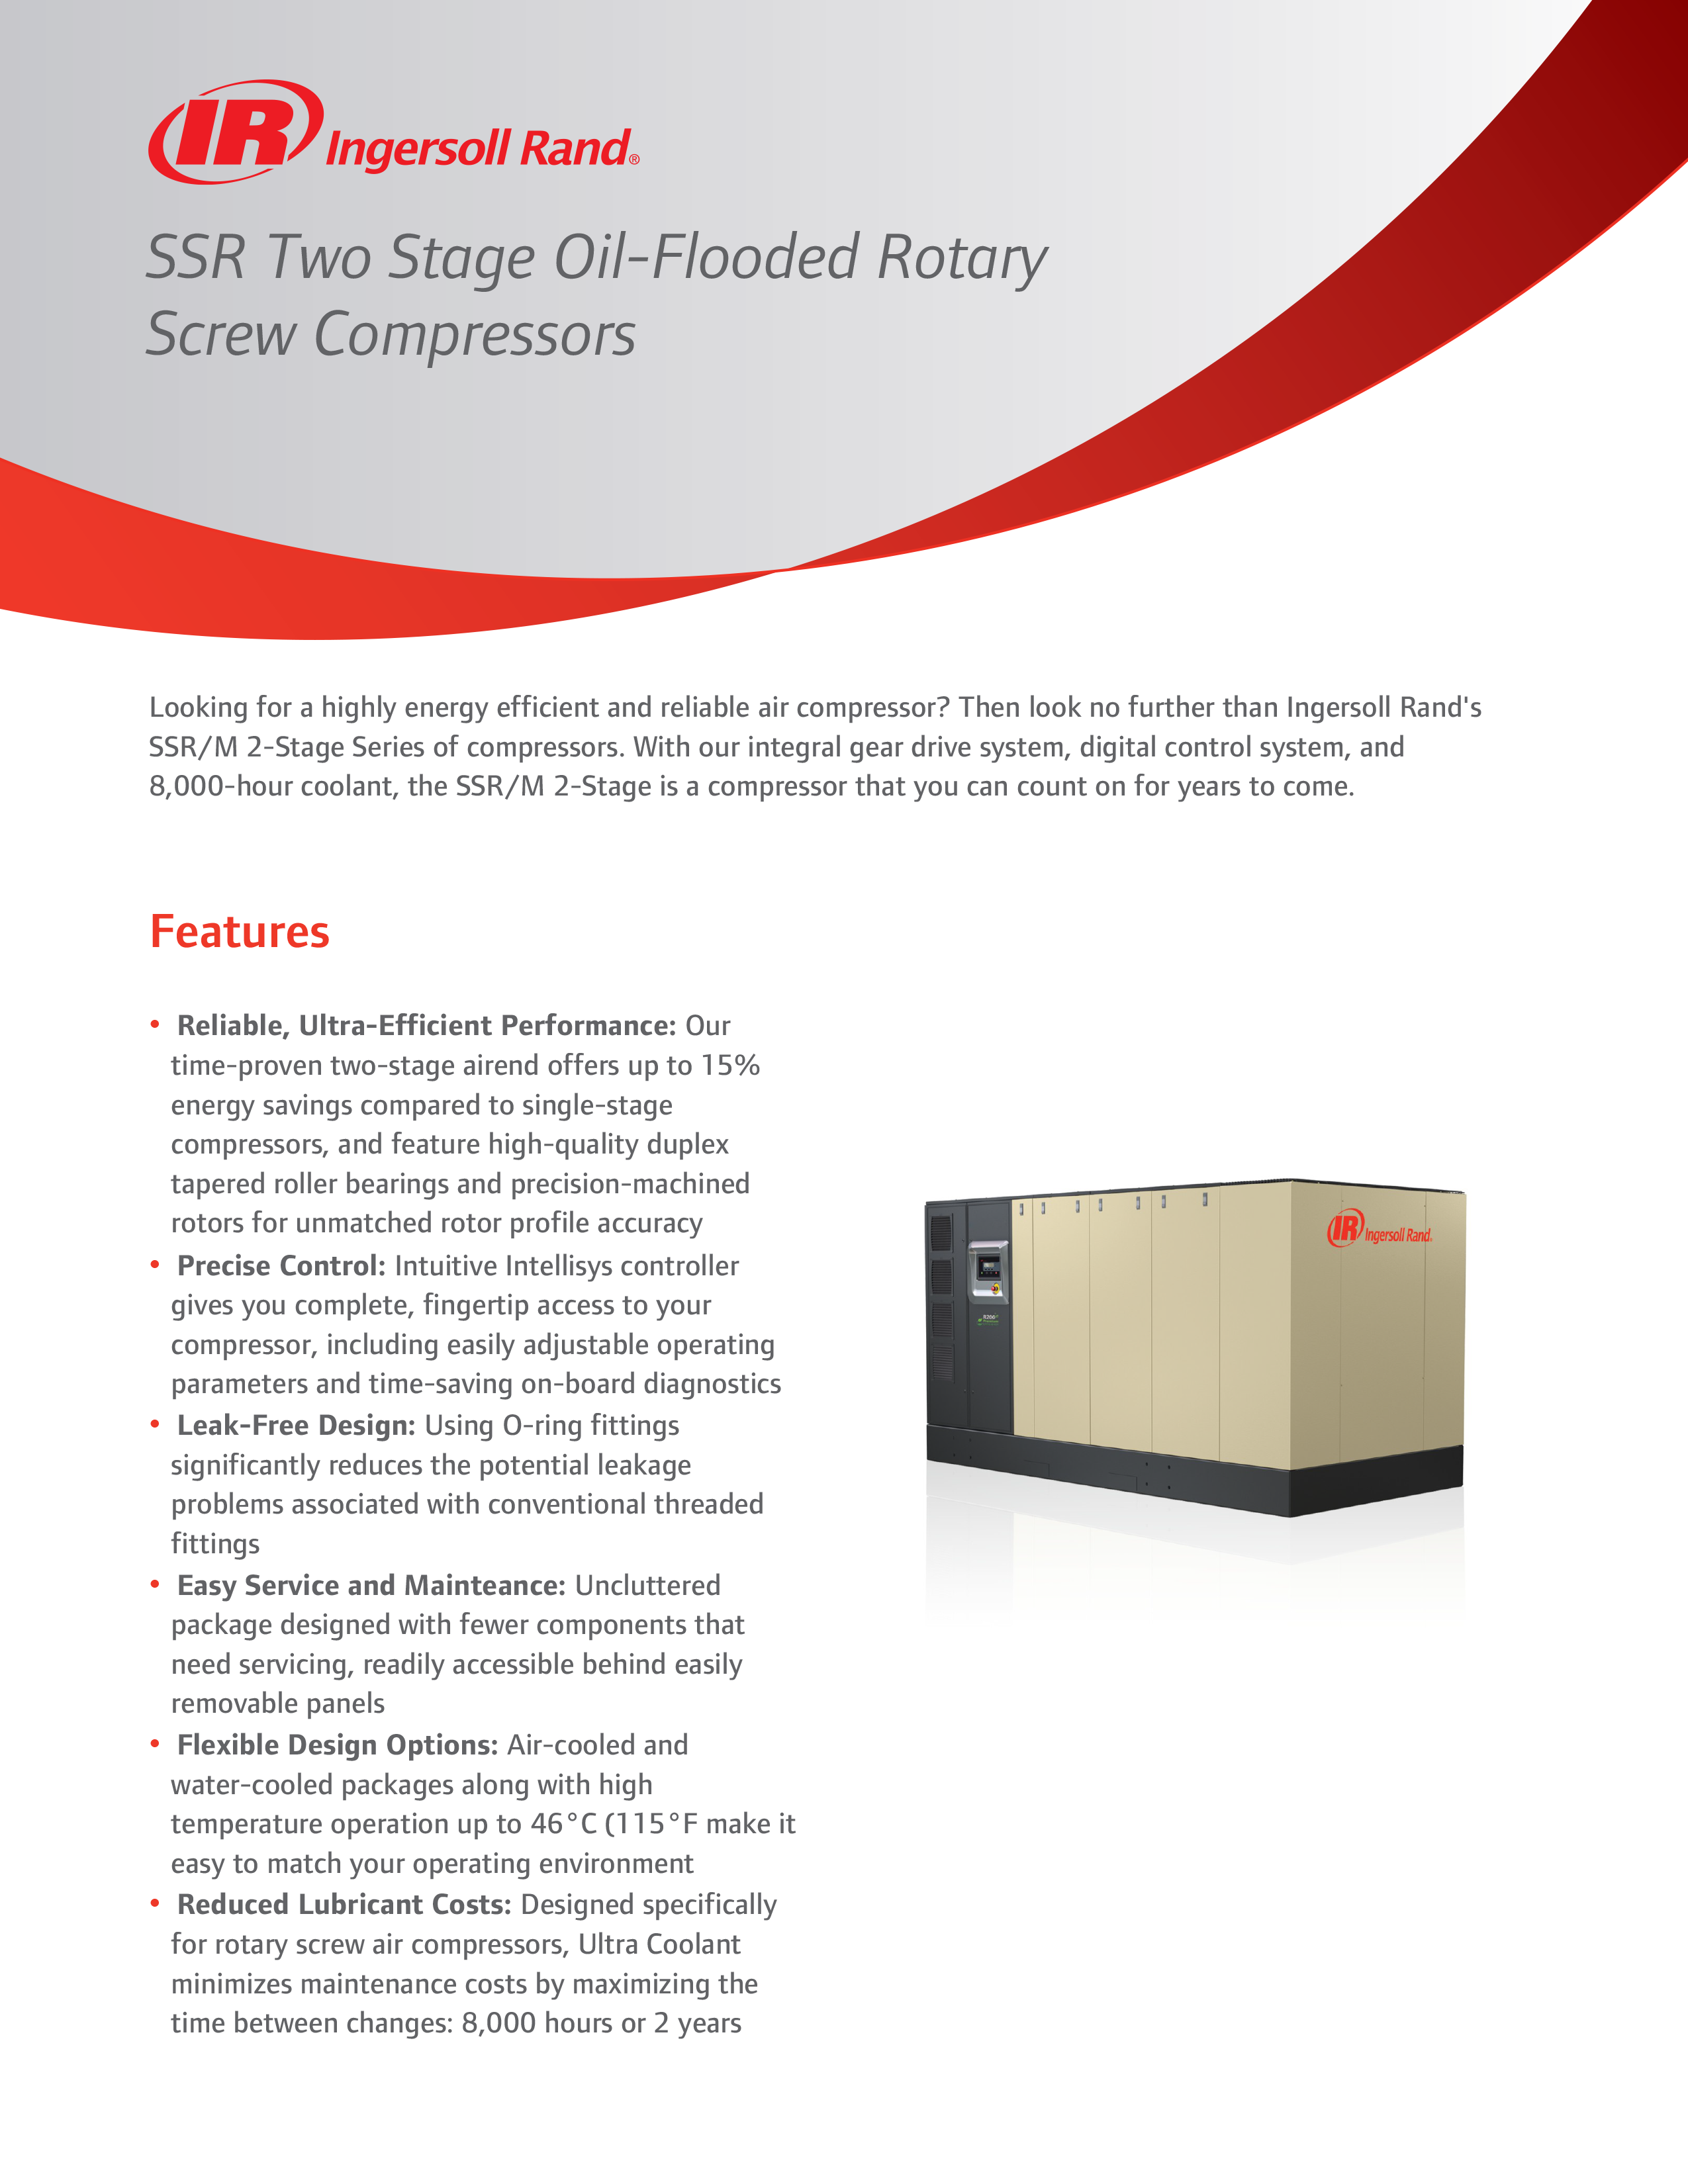 Ingersoll Rand SSR TWO STAGE OIL-FLOODED ROTARY SCREW COMPRESSORS